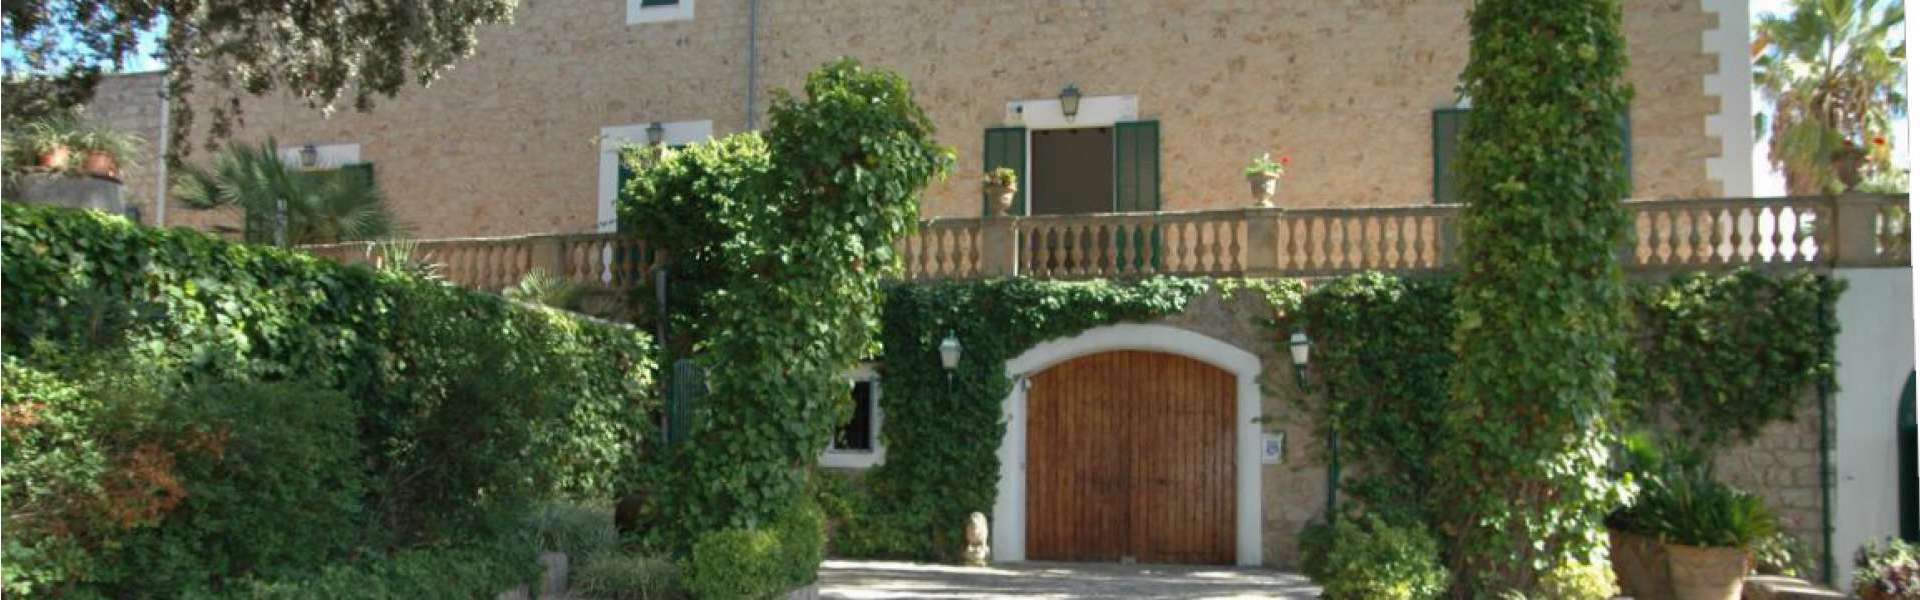 Manacor - Beautiful mansion from the 19th century for sale